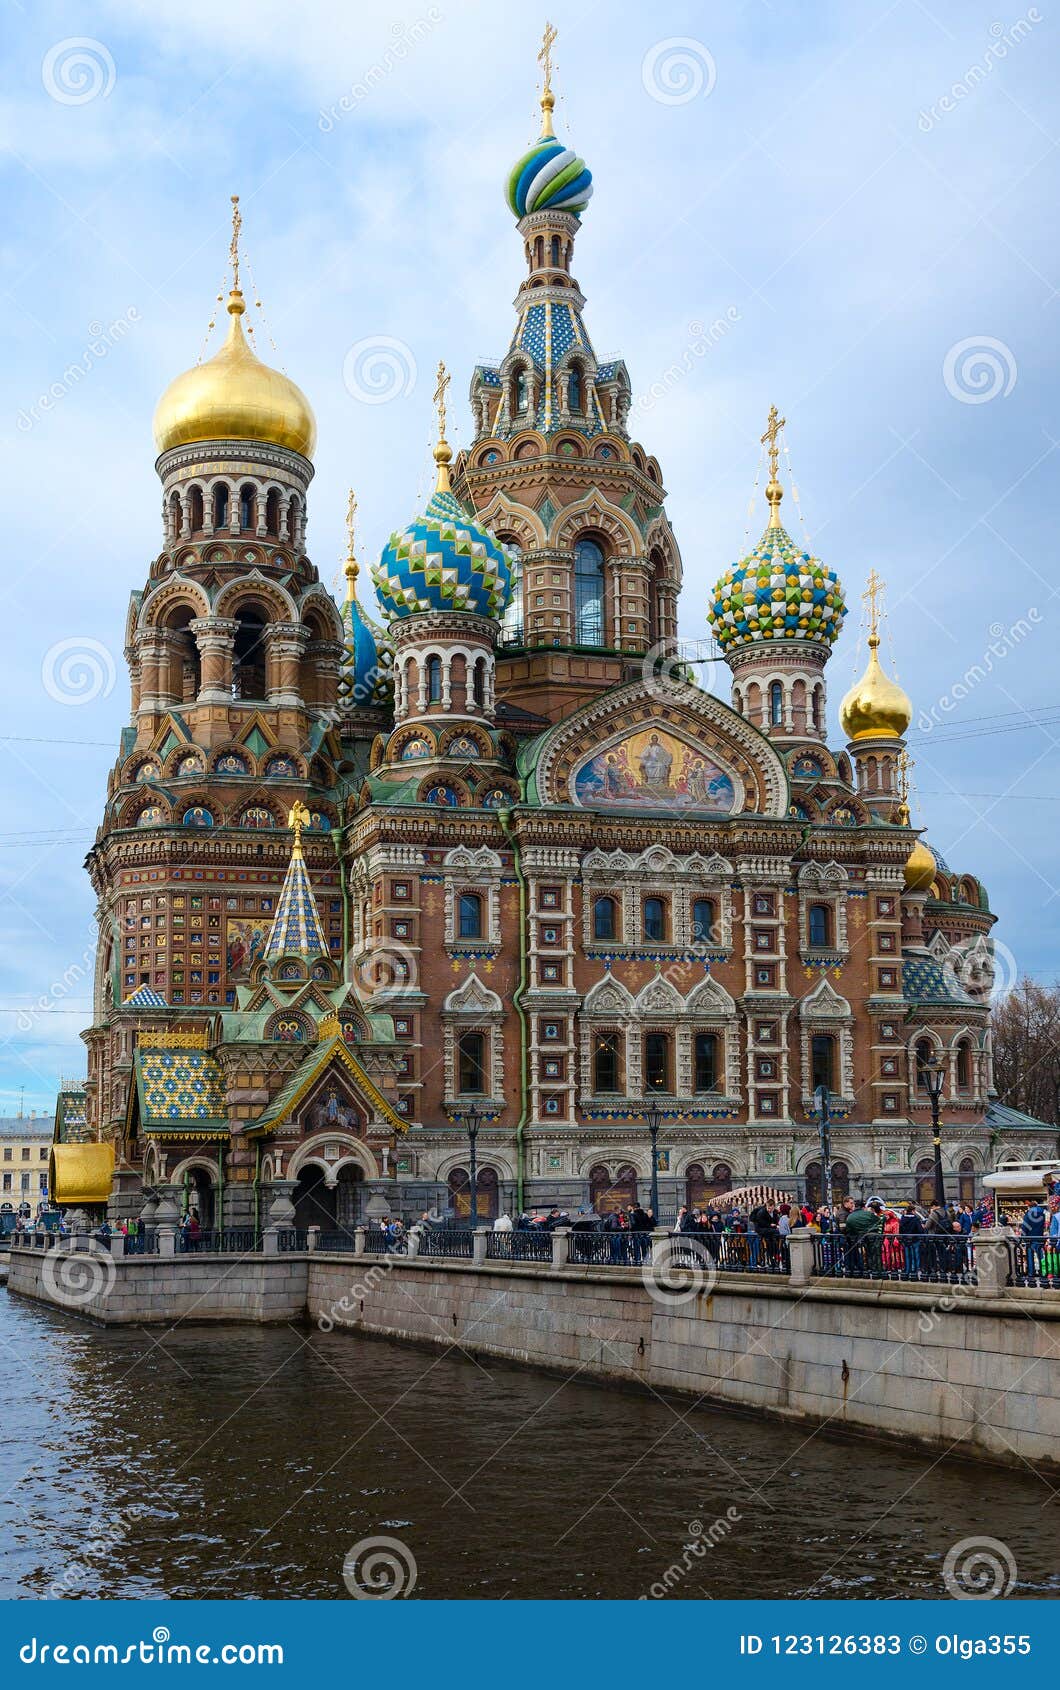 Church Of Savior On Blood Cathedral Of Resurrection Of Christ On Blood St Petersburg Russia Editorial Stock Photo Image Of Orthodoxy Architecture